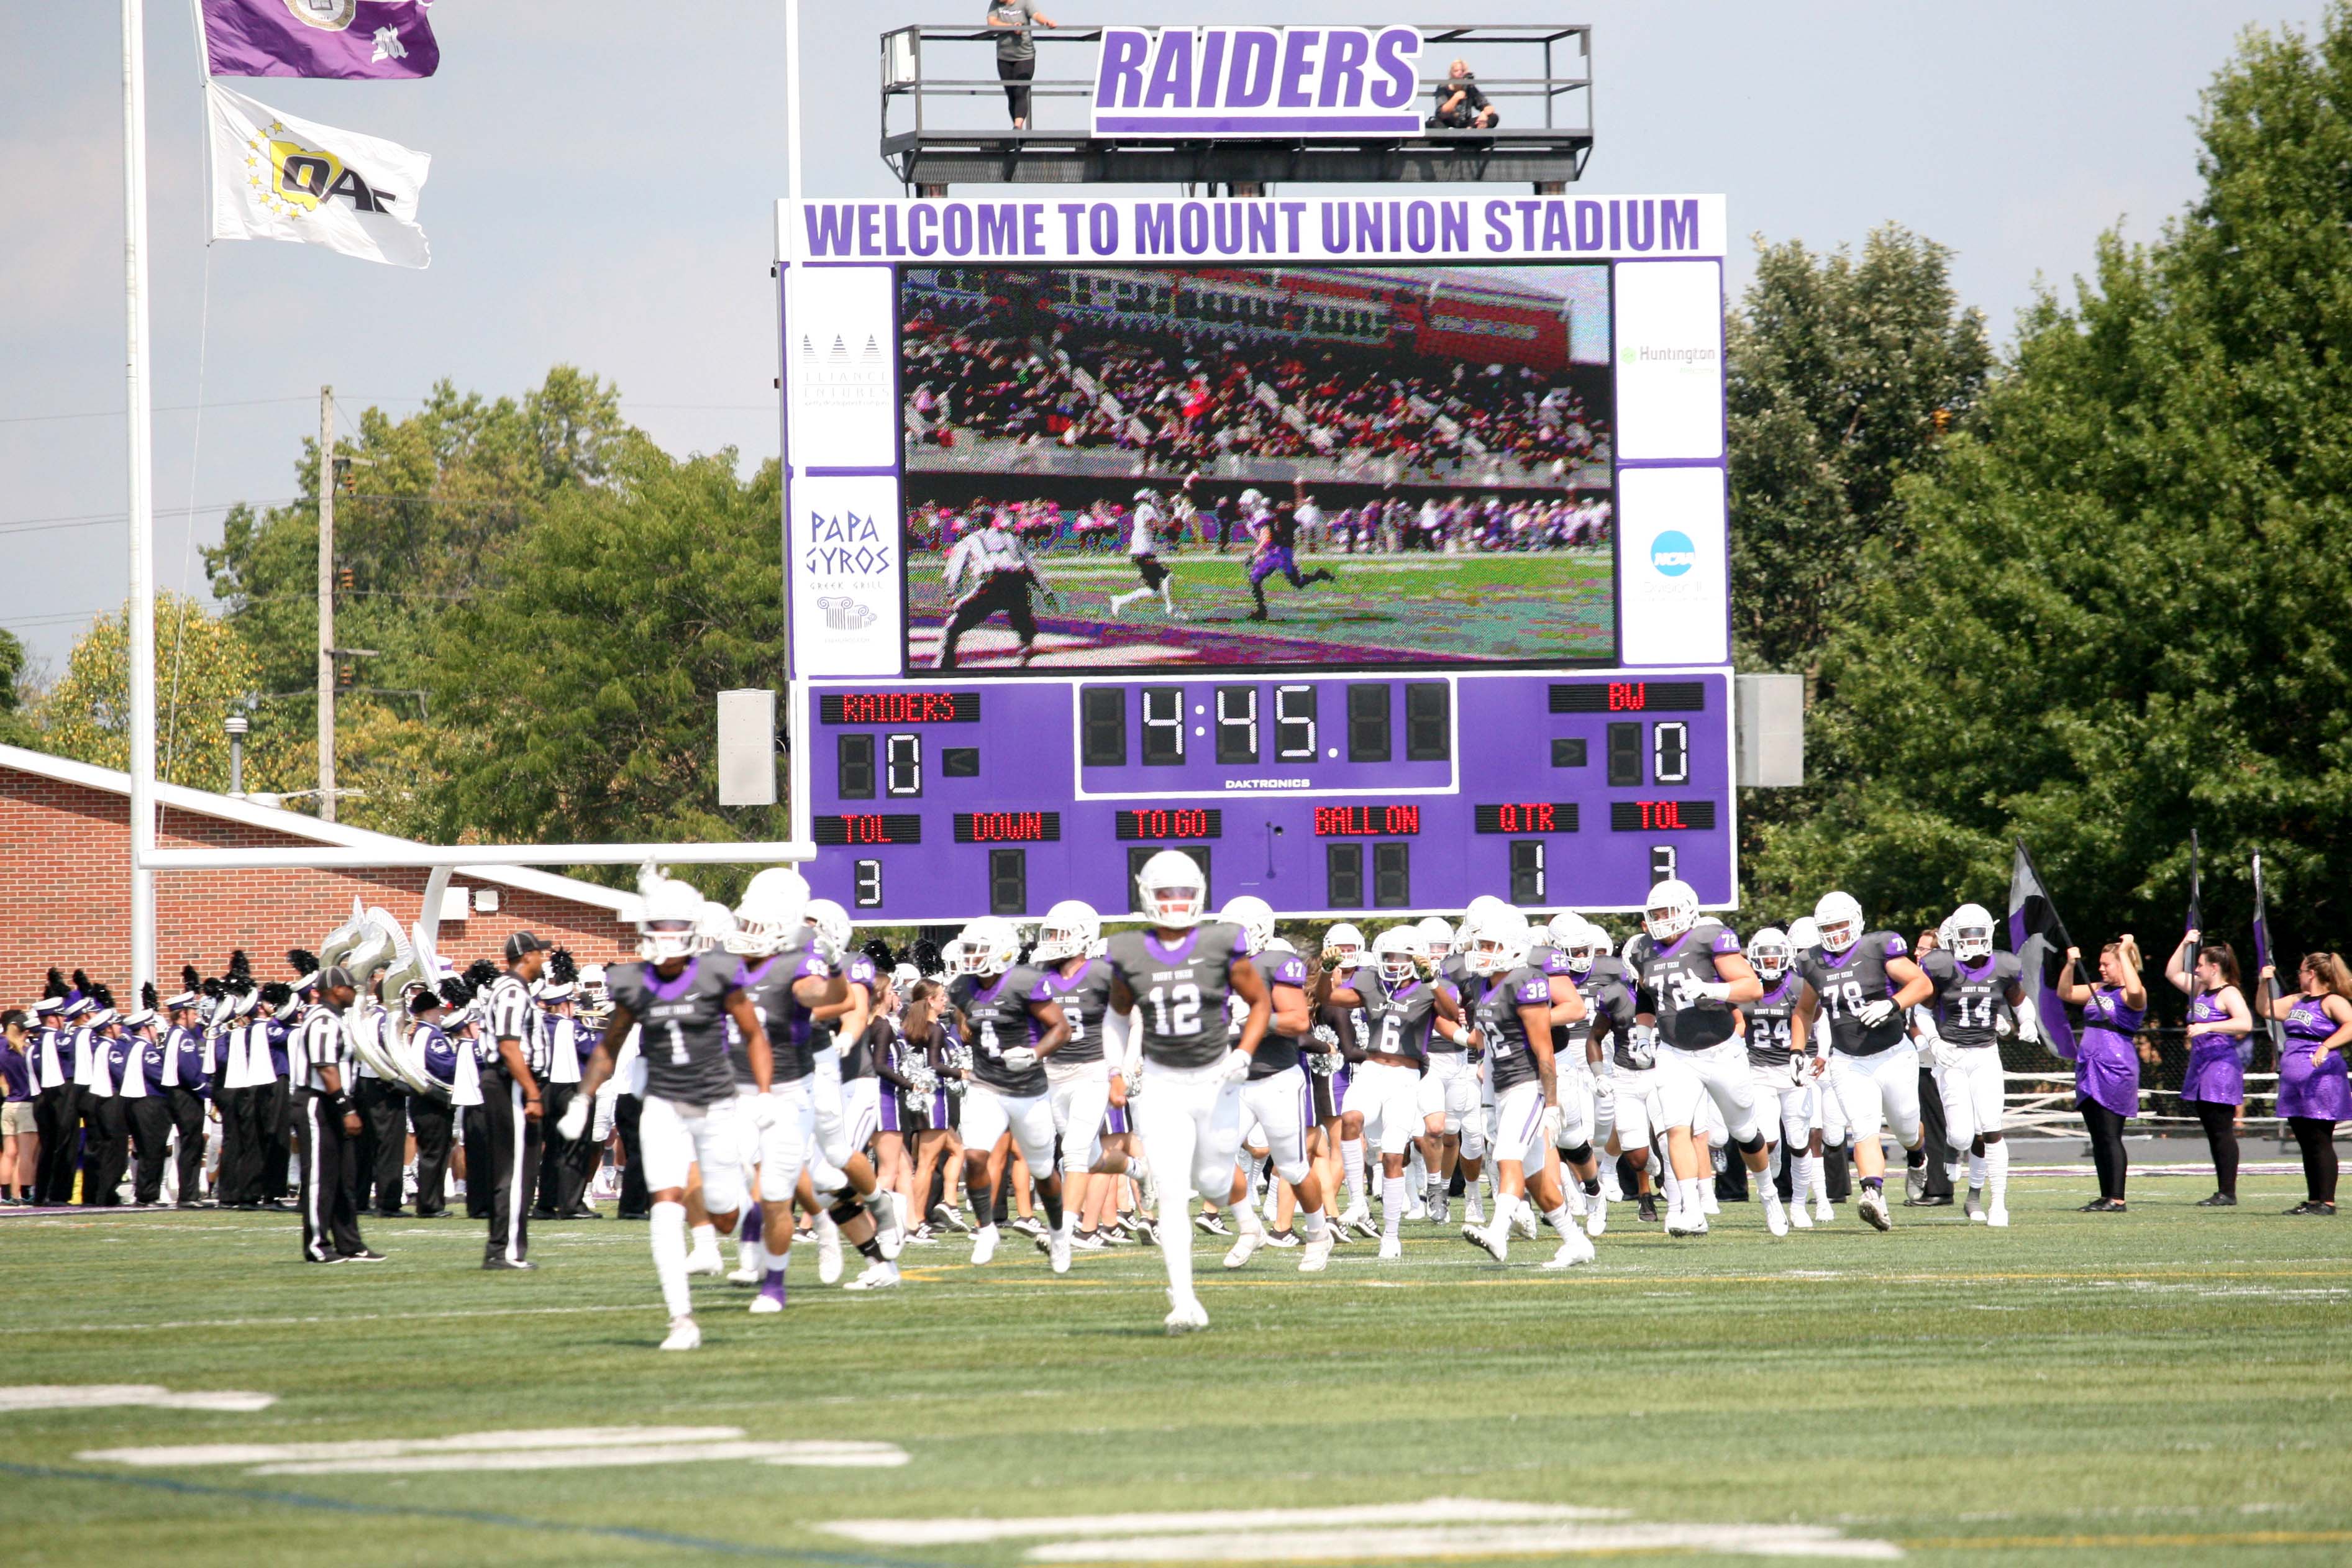 Mount Union Scoreboard during the Mount Union vs. Baldwin Wallace Game in September 2019